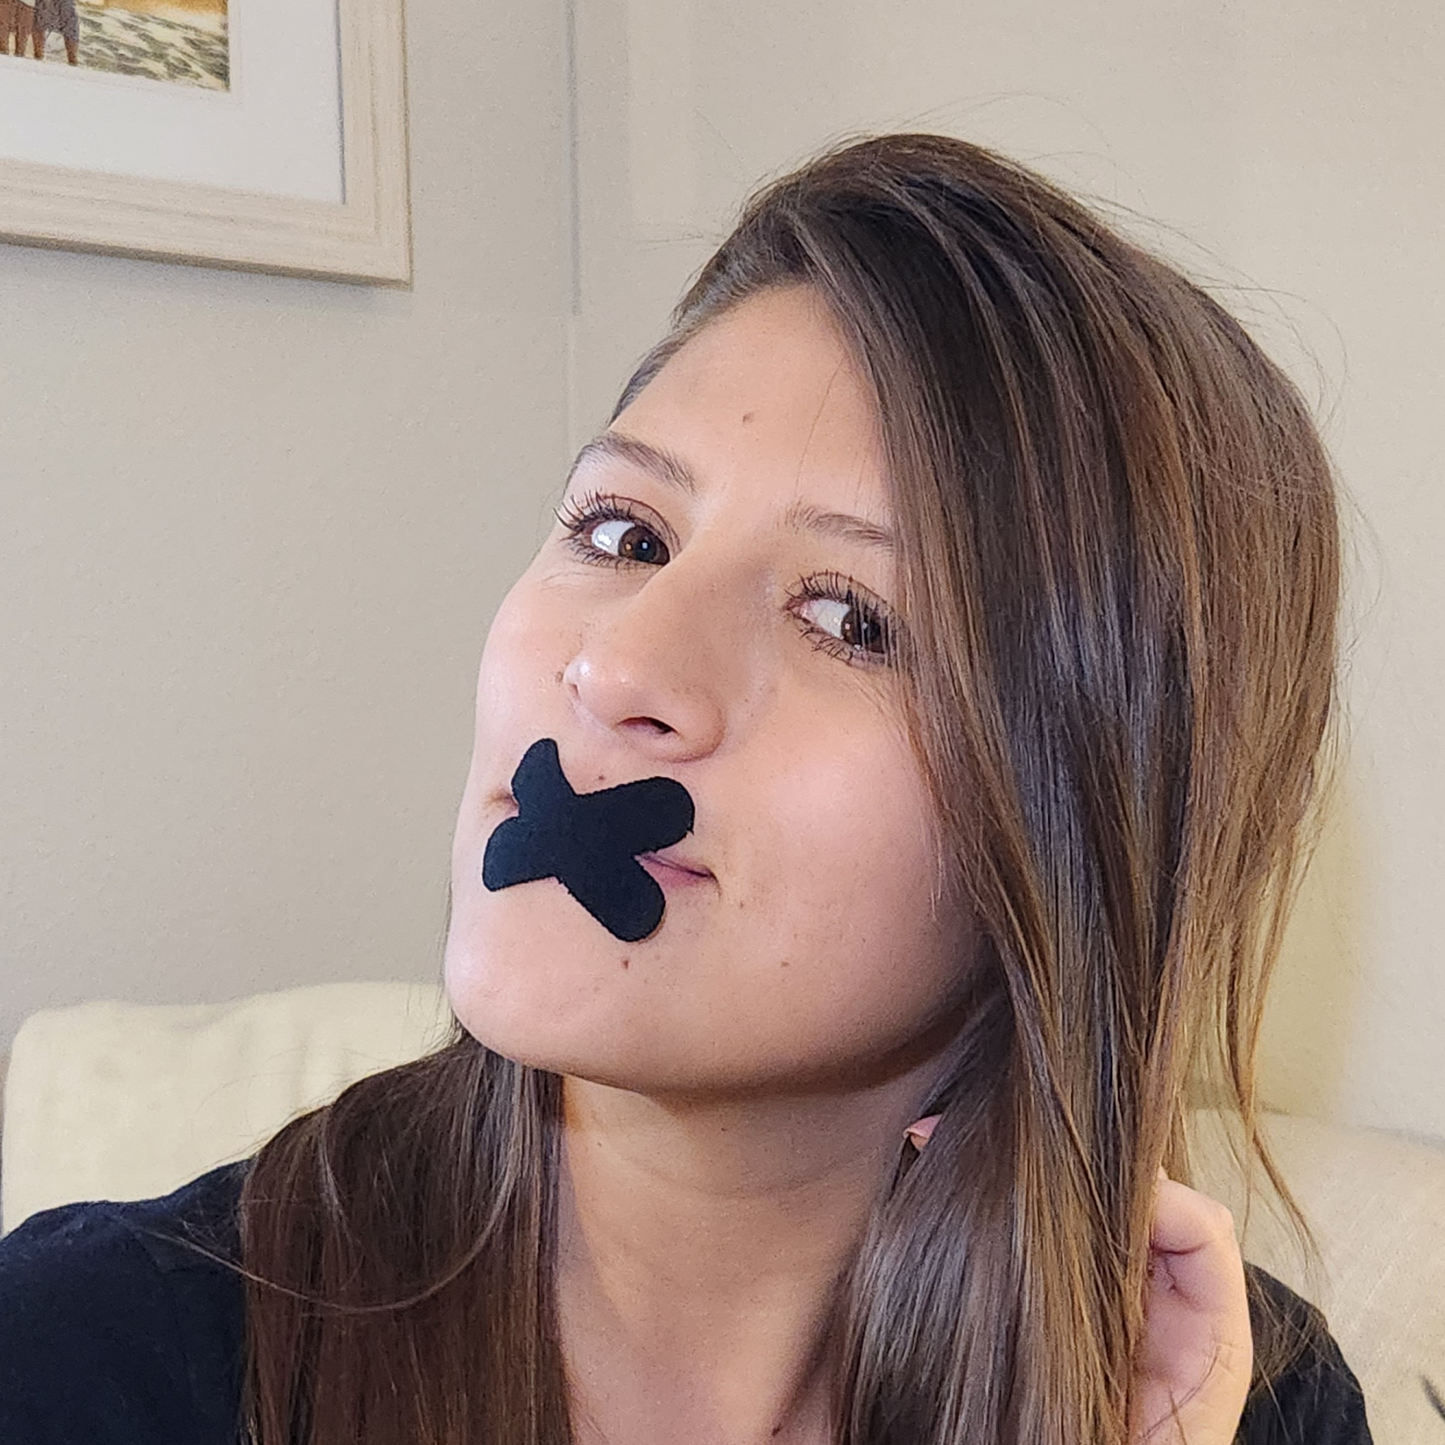 a woman with a black tape over her mouth